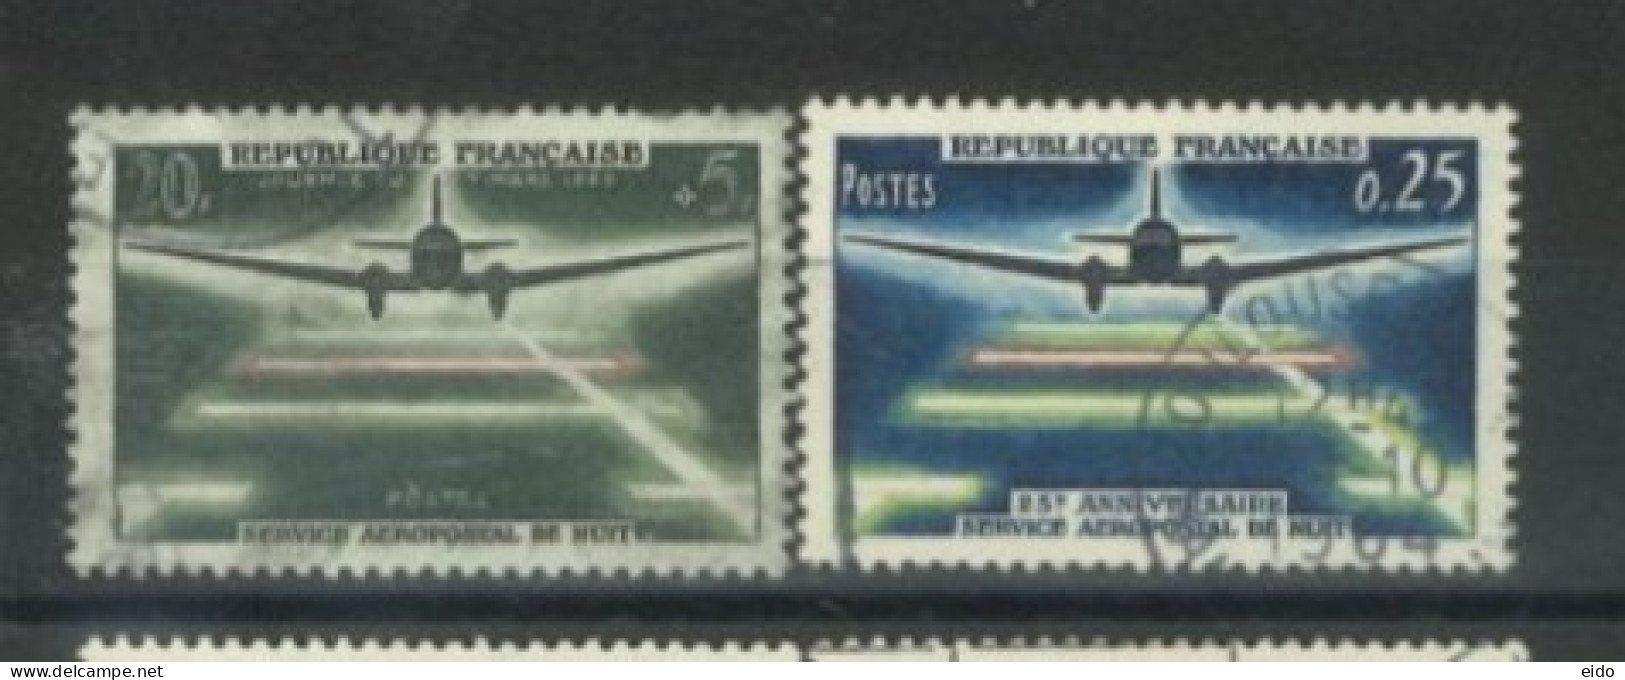 FRANCE - 1959. 64, POST DAY STAMPS SET OF 2, USED - Used Stamps